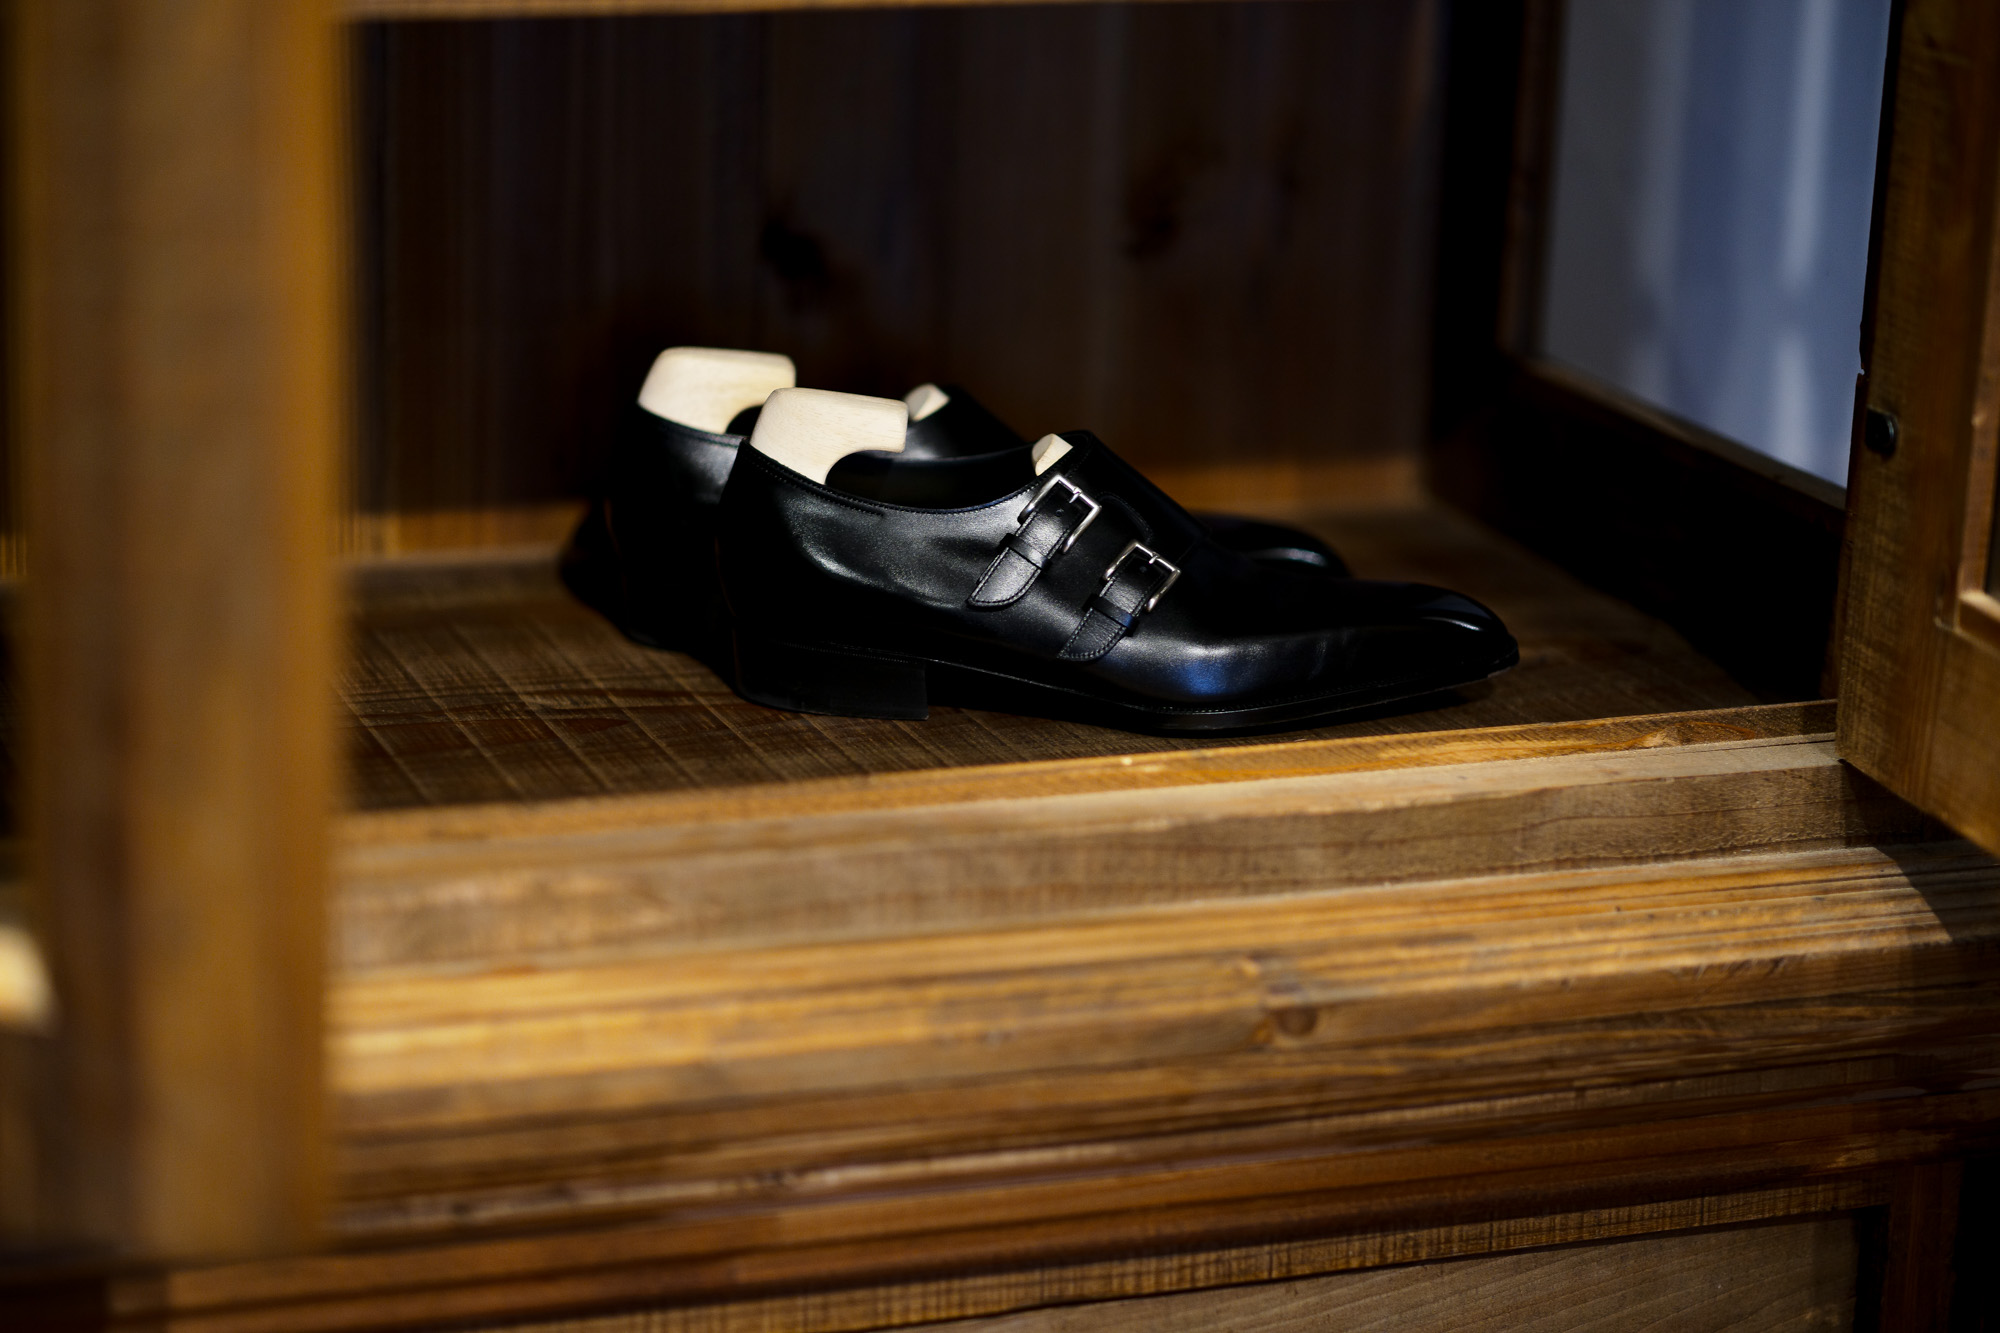 Yohei Fukuda // Double Monk Strap Shoes BLACK 【Bespoke】ヨーヘイフクダ 福田洋平 ビスポークシューズ オーダー会 受注会 名古屋 受注会開催 オーダー会開催 ダブルモンクストラップシューズ ドレスシューズ ブラック 仮縫い 完成 福田洋平 Yohei Fukuda　東京都港区北青山2-12-27 BAL青山2F　既製靴　ビスポークシューズ ビスポーク 受注会 オーダー会 ダブルモンク テディベア Yohei Fukuda learned shoemaking in Northamptonshire, the traditional home of English shoemaking, followed by a local apprenticeship and then work for several years for London firms.After returning to Japan he founded Yohei Fukuda in Tokyo in 2008. Since its founding the workshop has grown and now has 4 additional craftsmen, each driven by the same passion for shoemaking and dedication to quality for which Yohei Fukuda shoes are known.At Yohei Fukuda the aim is to create classically styled shoes of the highest quality that will be of value to their owners for many years. By using the finest materials and time-tested techniques of traditional bespoke shoemaking, we hope to make shoes of timeless elegance.名だたるビスポーク・シューメーカーで靴作りを手がけてきた福田洋平が2008年に設立した「Yohei Fukuda」の公式オンラインショップ。伝統的な英国靴の仕立てを継承しつつ、ミリ単位にまでこだわる日本人ならではの感性で、モダン